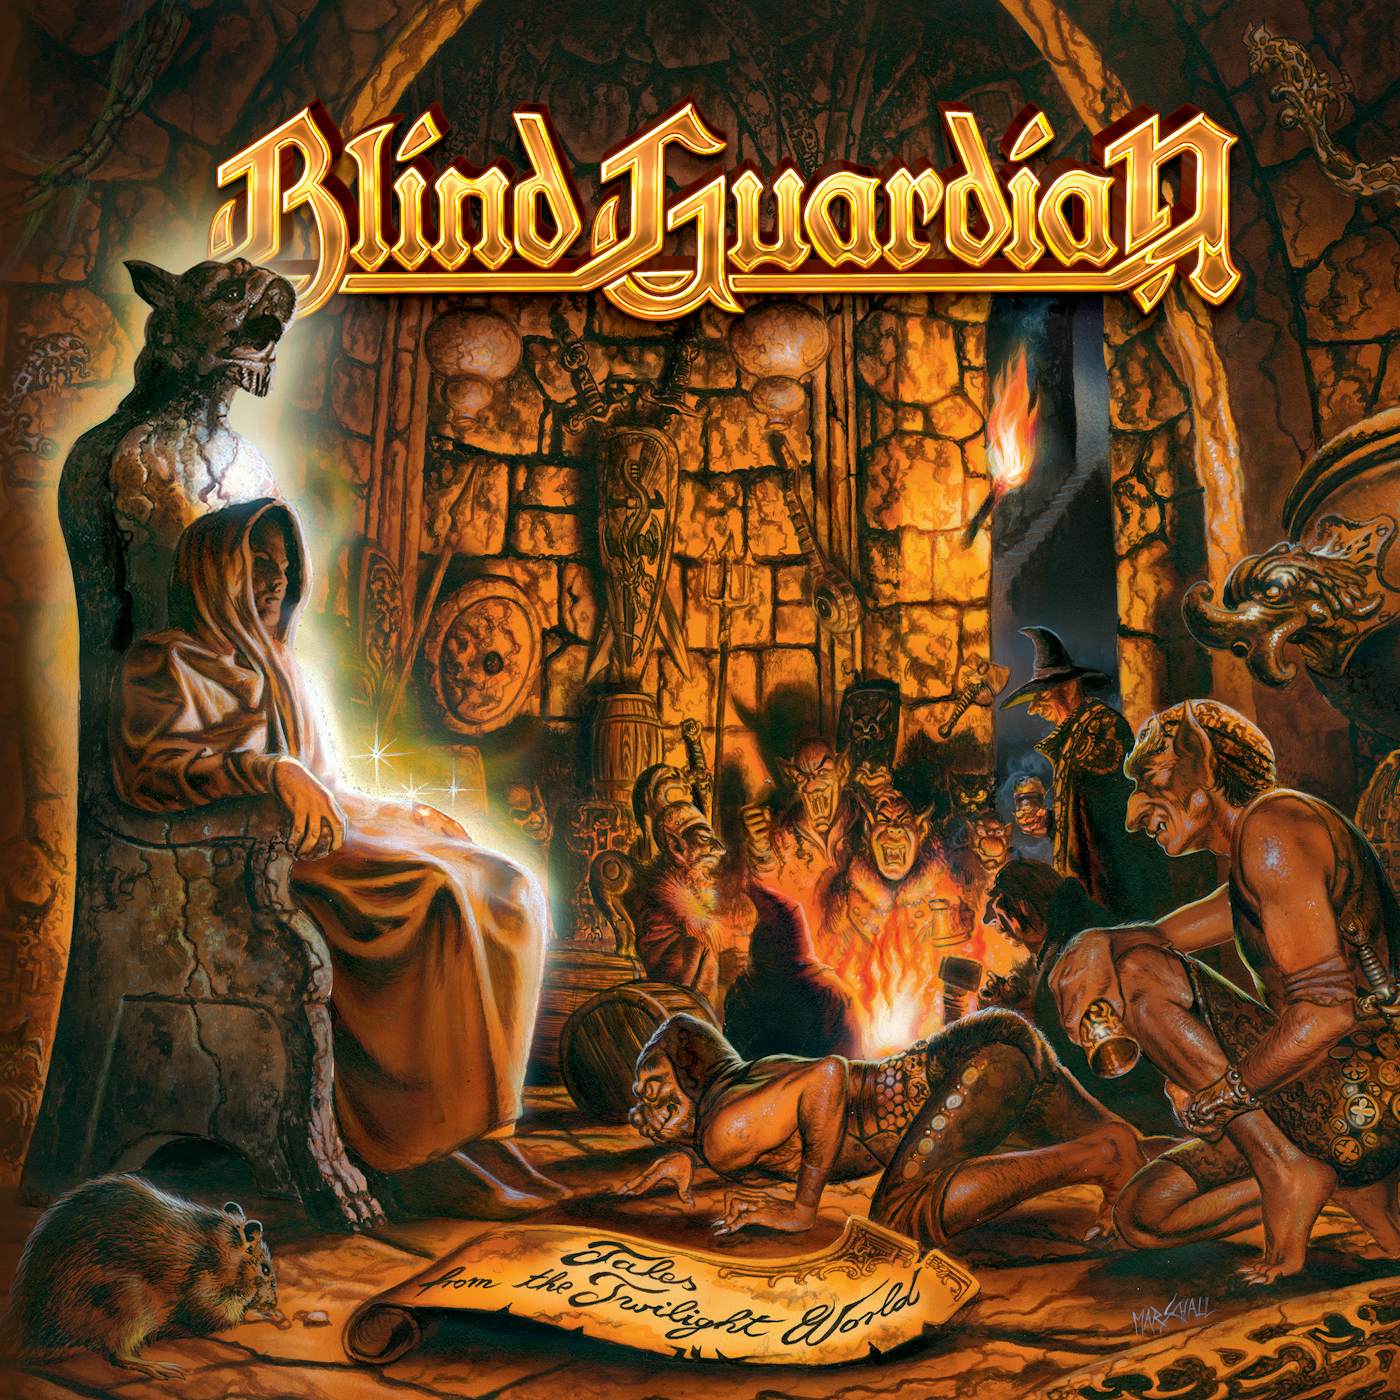 Blind Guardian TALES FROM THE TWILIGHT WORLD CD